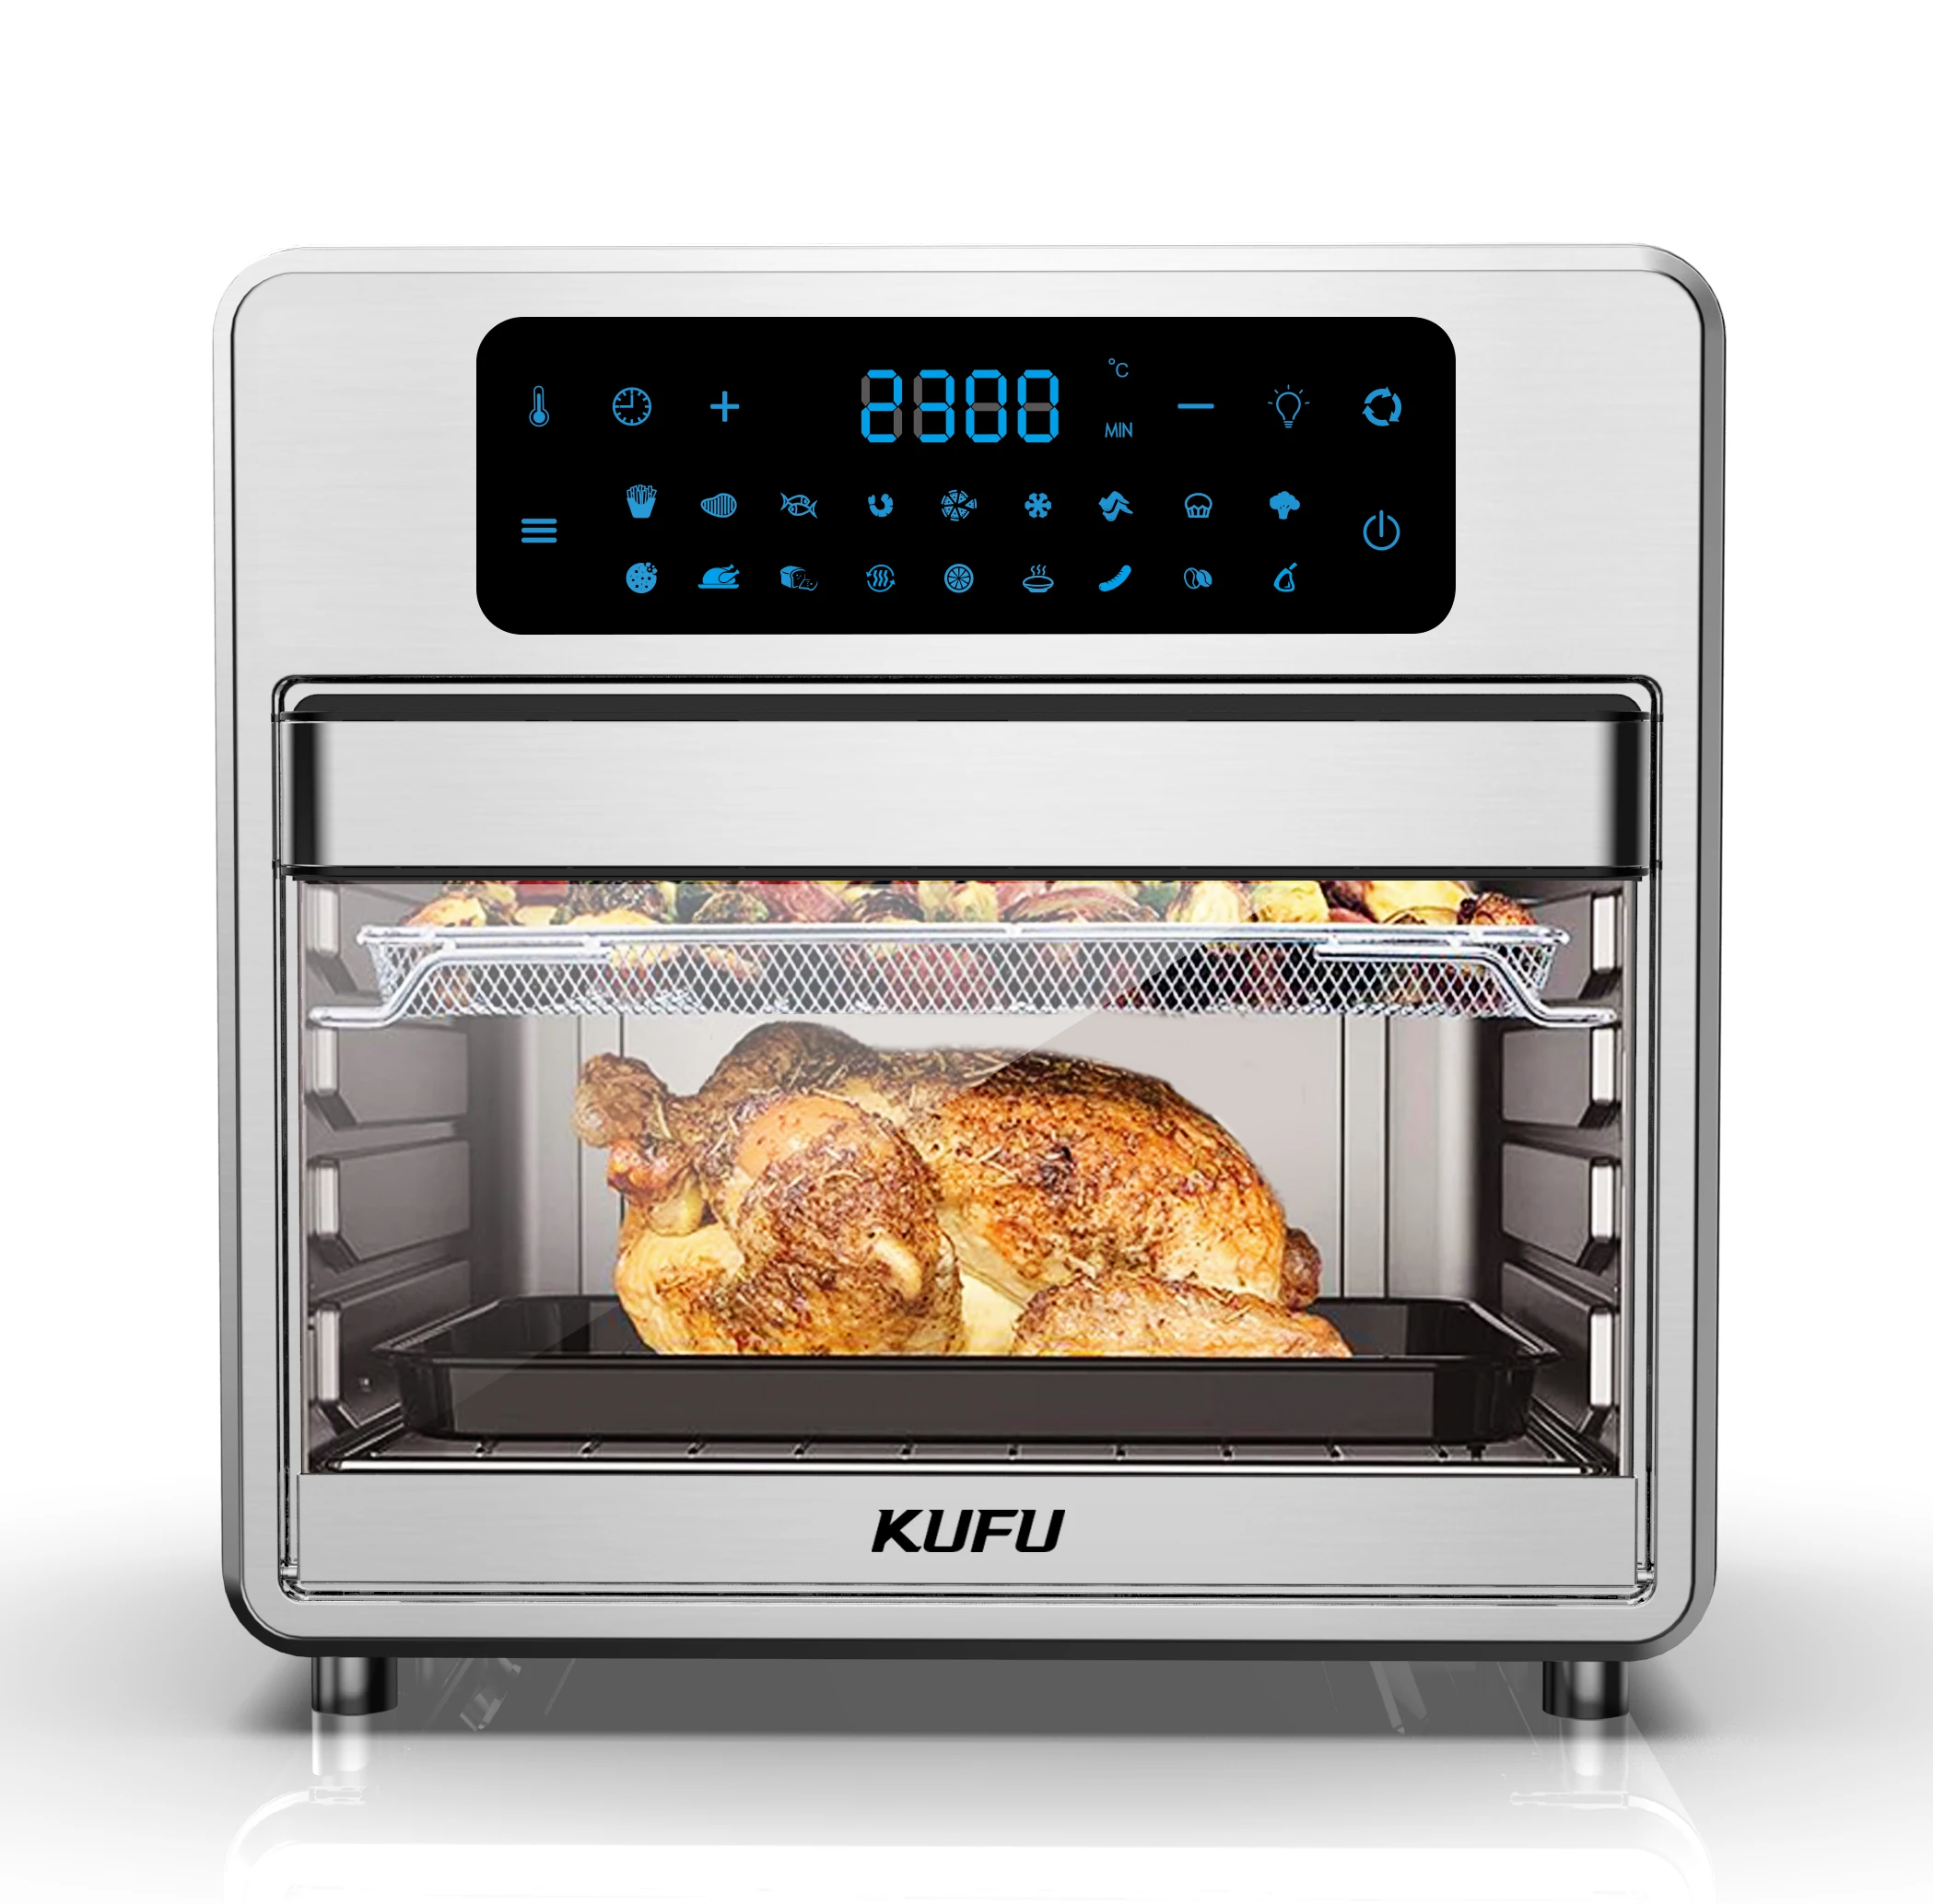 Shiren 15L Liter 1500W Factory Price Healthy Digital Air Fryer The Power 360  Manual   Oven t962a infrared reflow oven 1500w 300 x 320mm infrared ic heater t 962a for bga smd smt rework